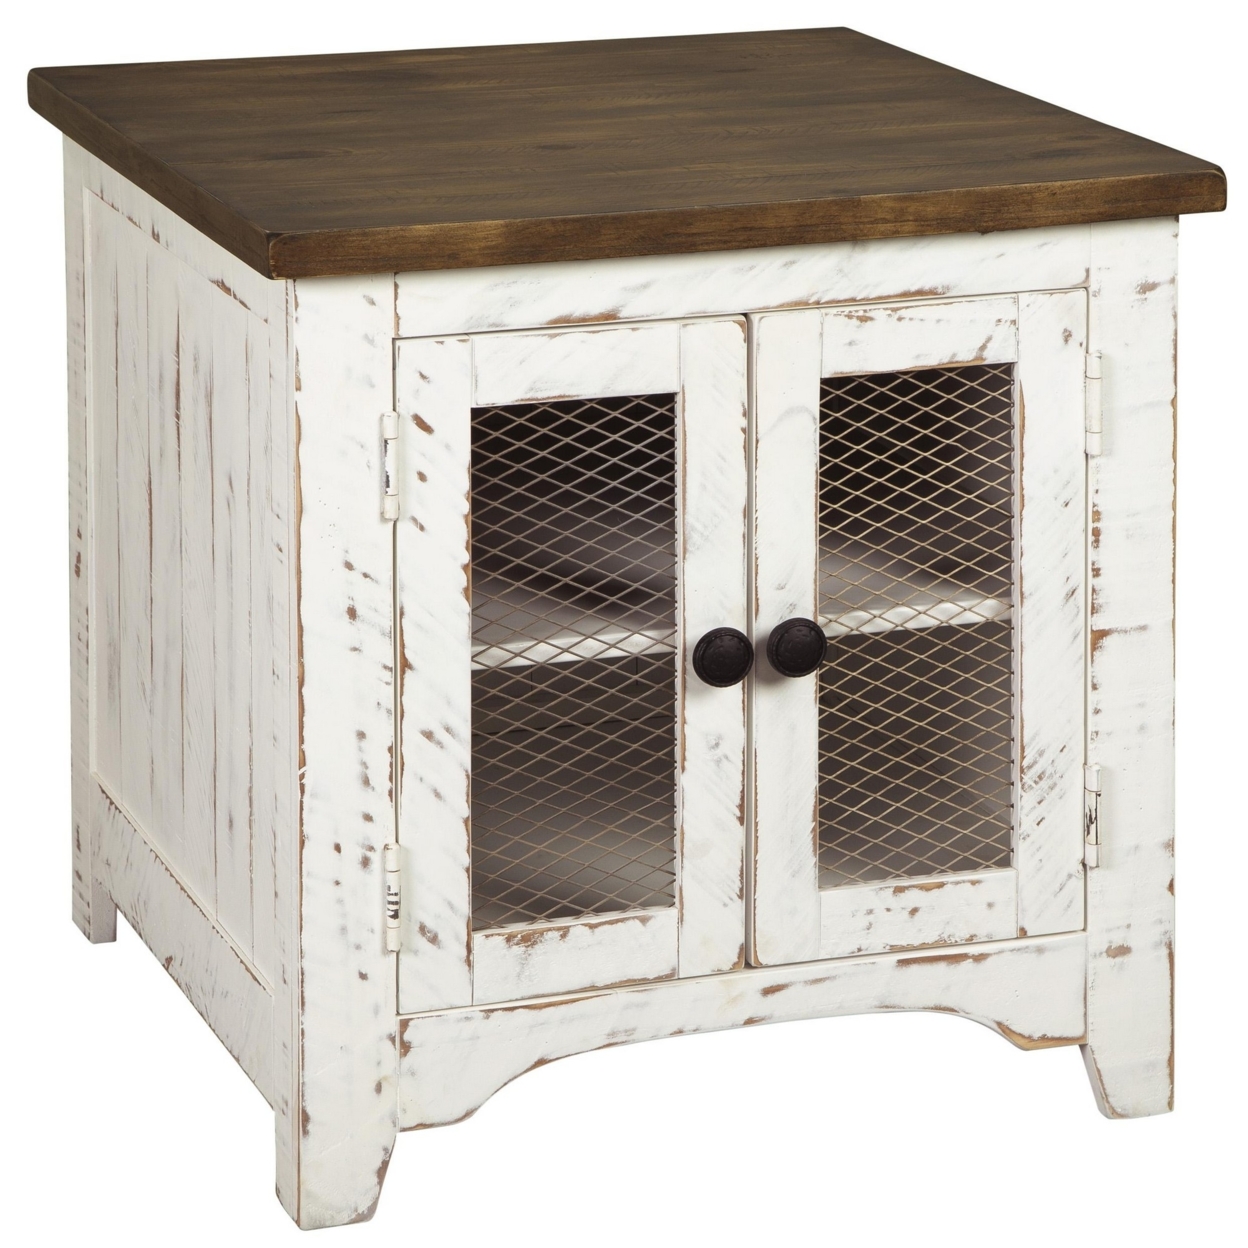 Two Tone Wooden End Table With Metal Grill Cabinet, Brown And White- Saltoro Sherpi